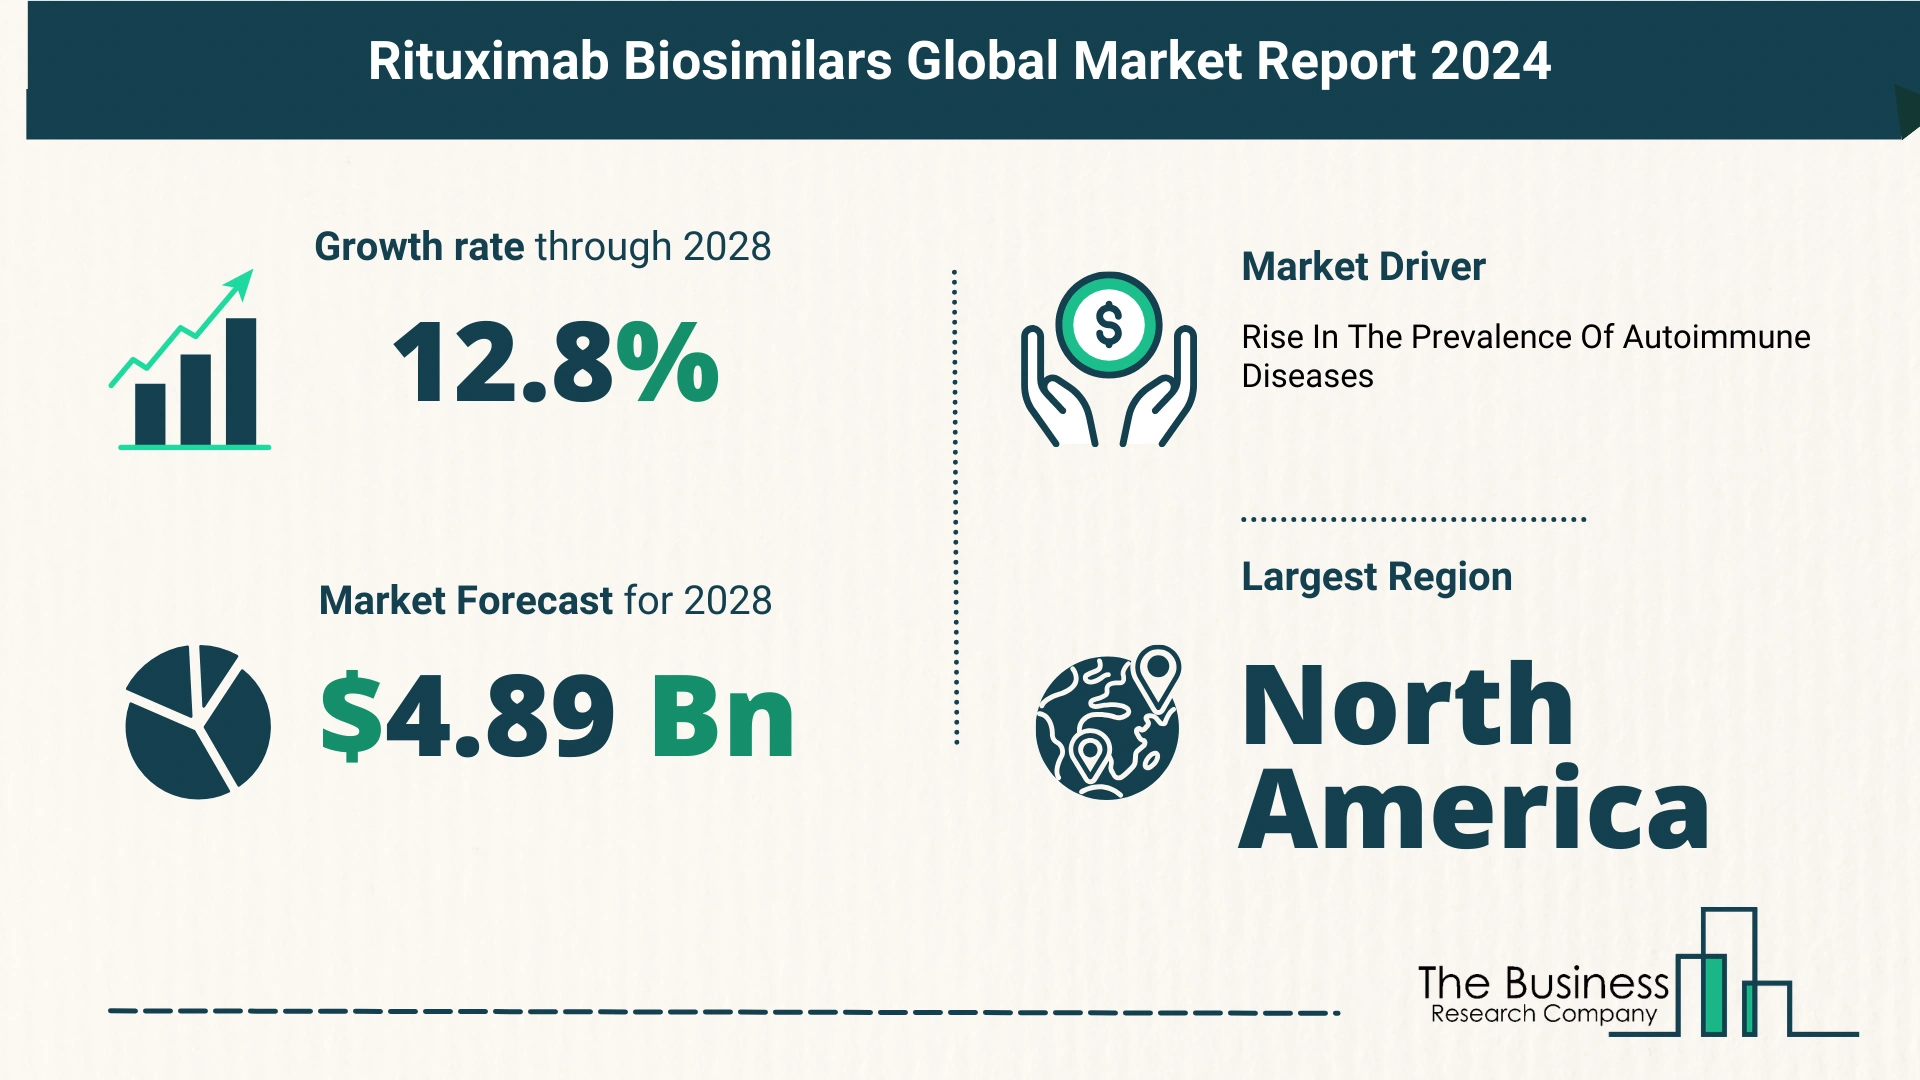 Key Insights On The Rituximab Biosimilars Market 2024 – Size, Driver, And Major Players